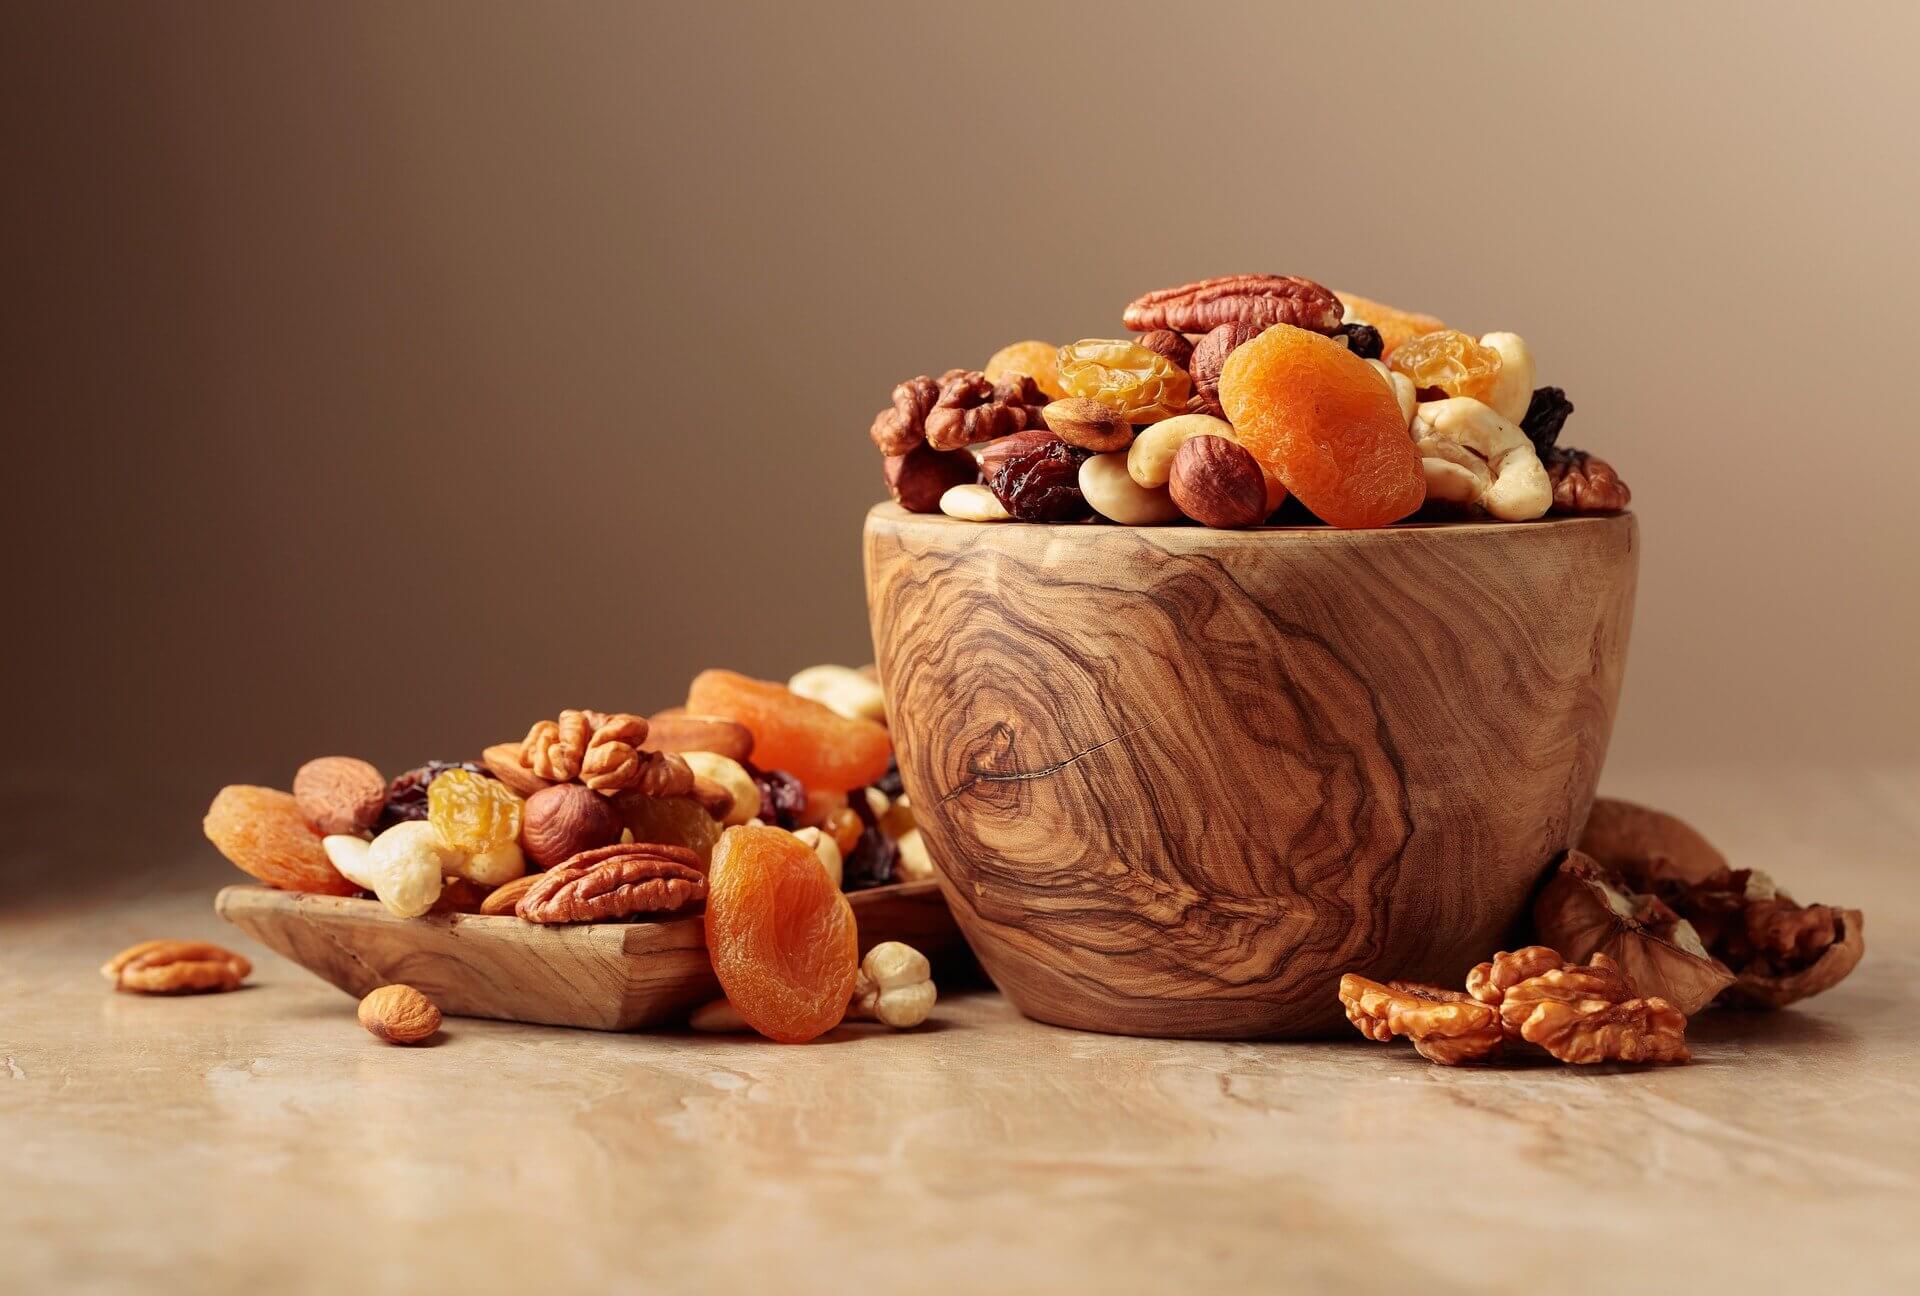 Know This Before you buy Kashmiri dry fruits online